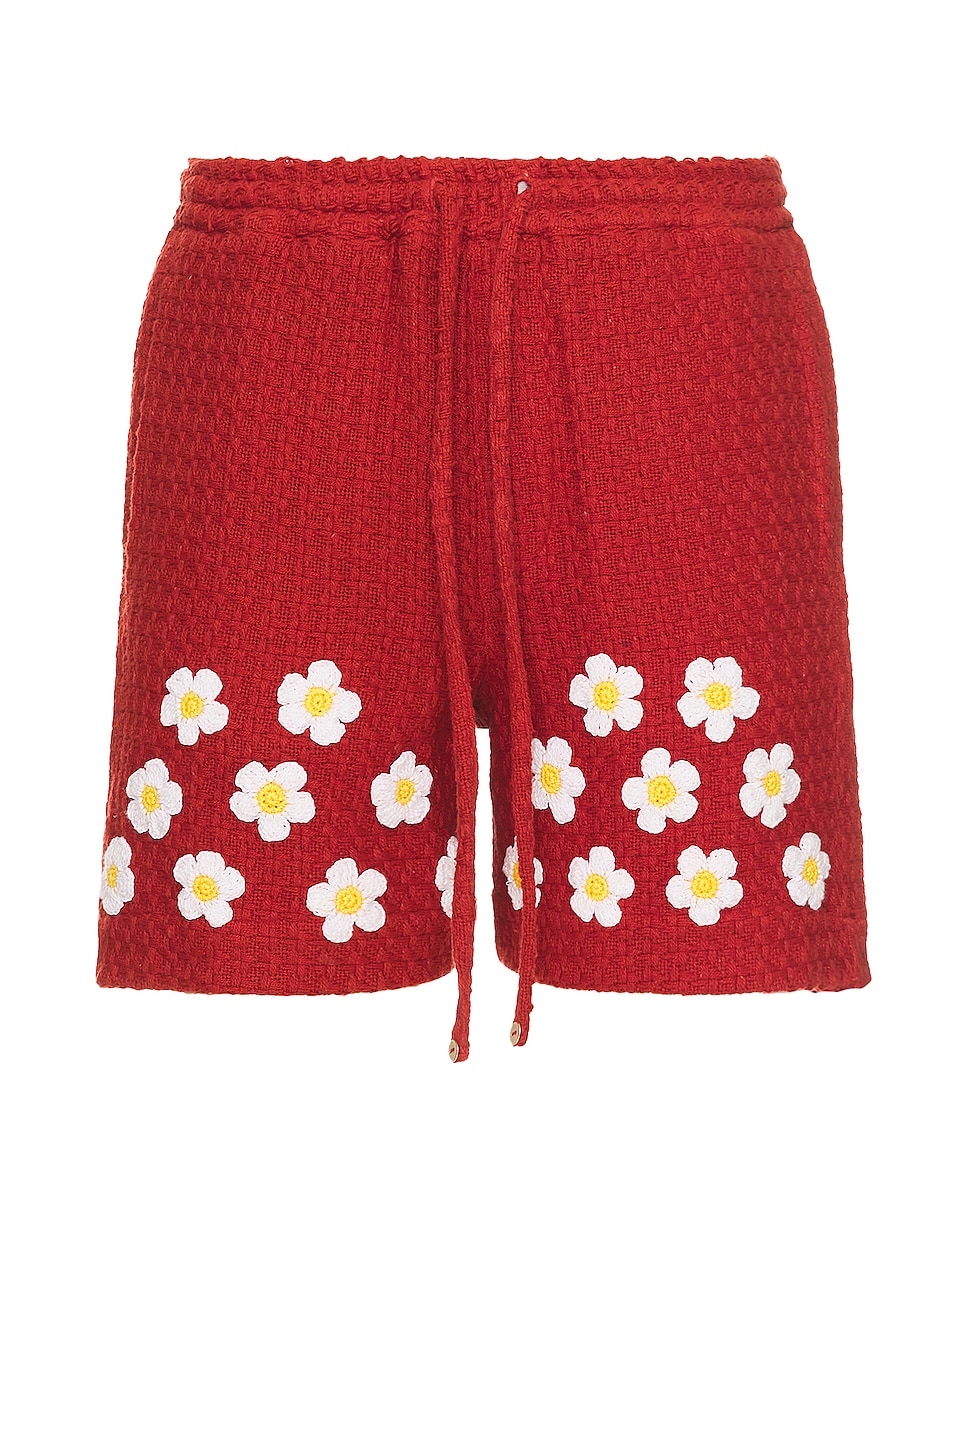 Image 1 of HARAGO Crochet Applique Shorts in Red